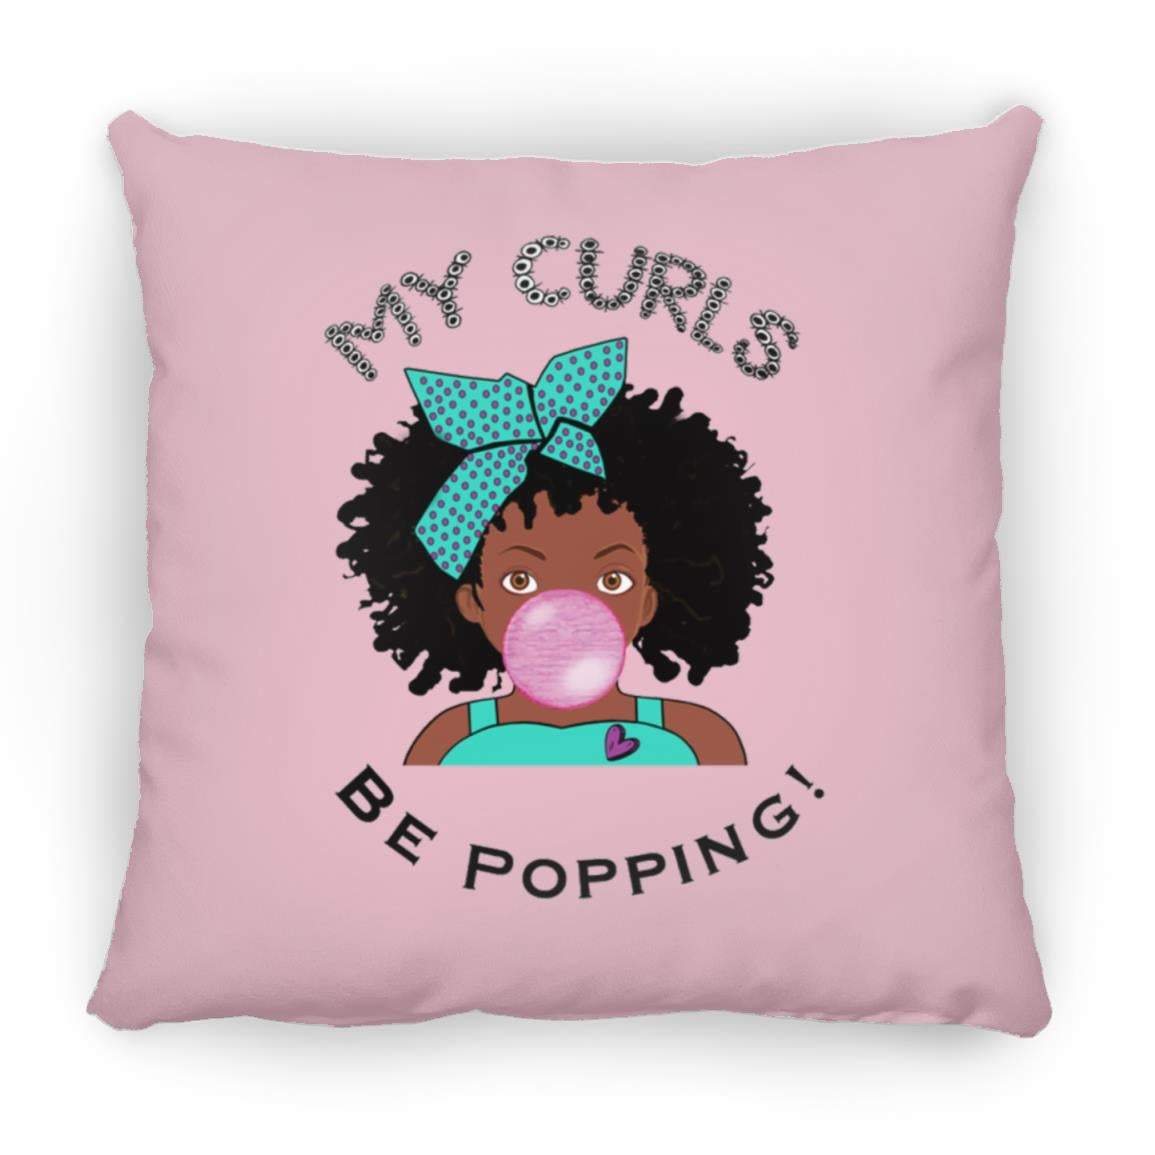 Curls Popping Square Pillow 16x16-CustomCat-Accessories,Pillows